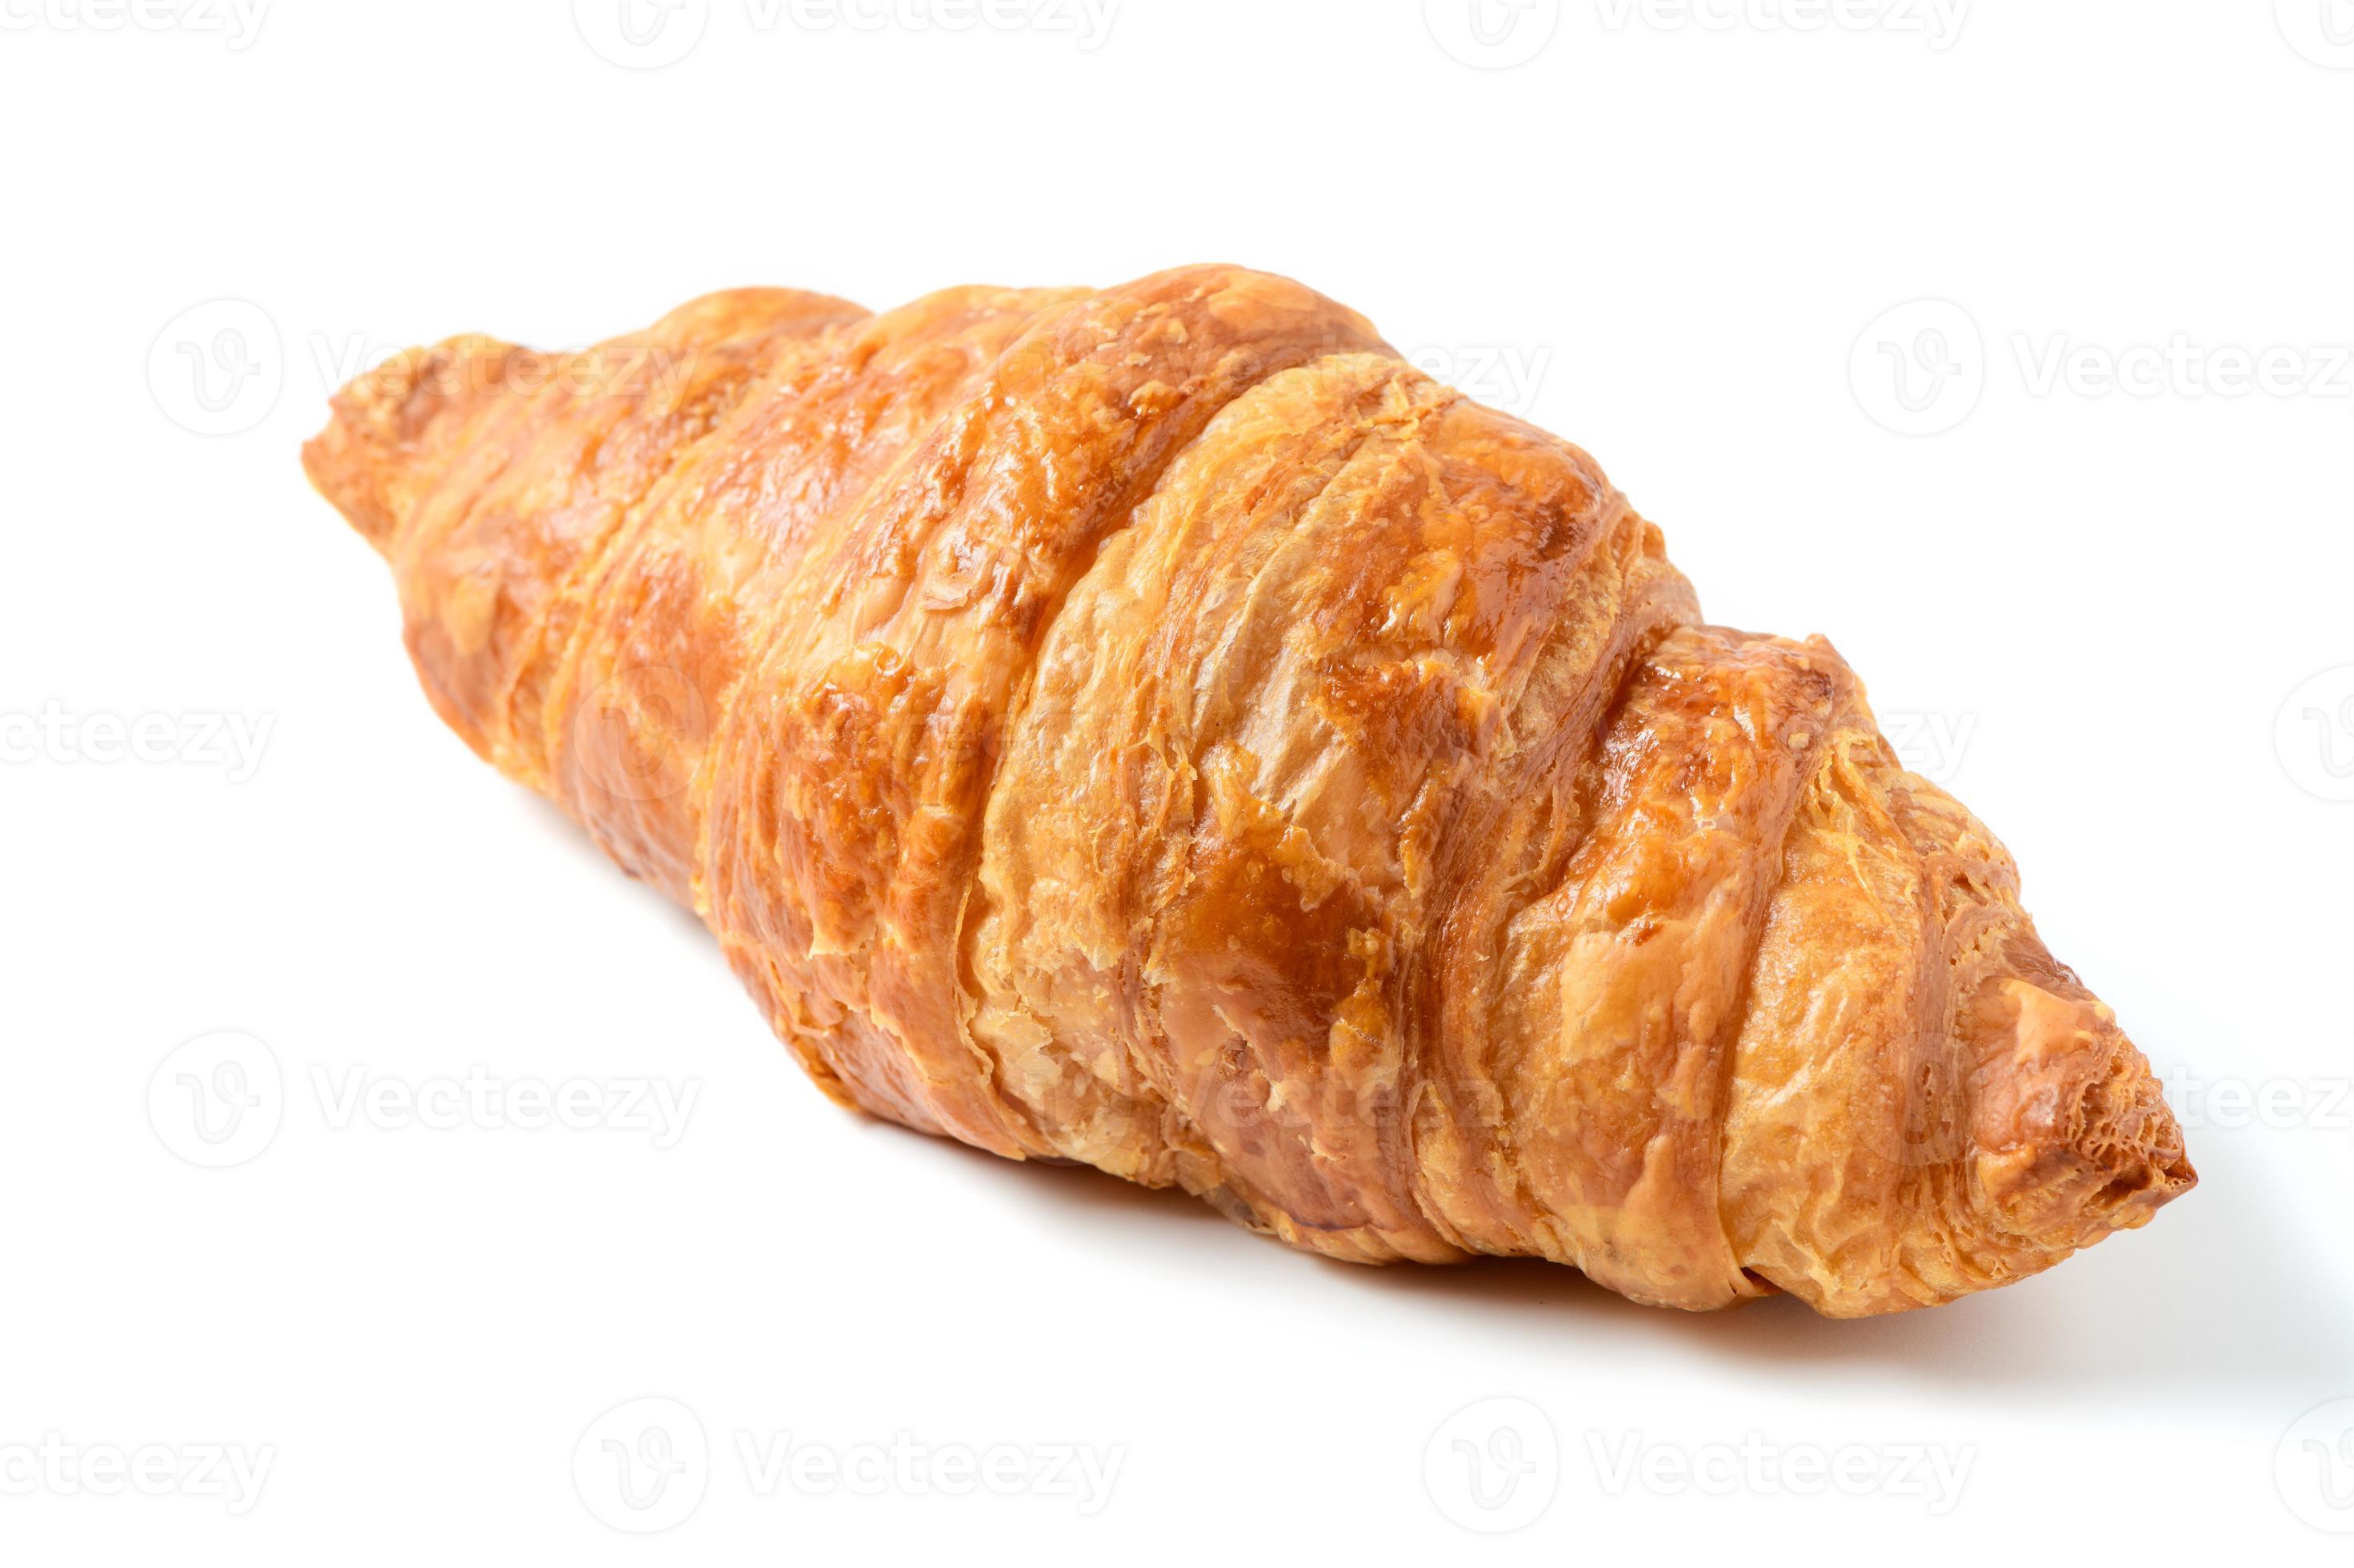 Homemade 20828583 Vecteezy Photo on Croissant isolated white bakery Stock background, at Butter